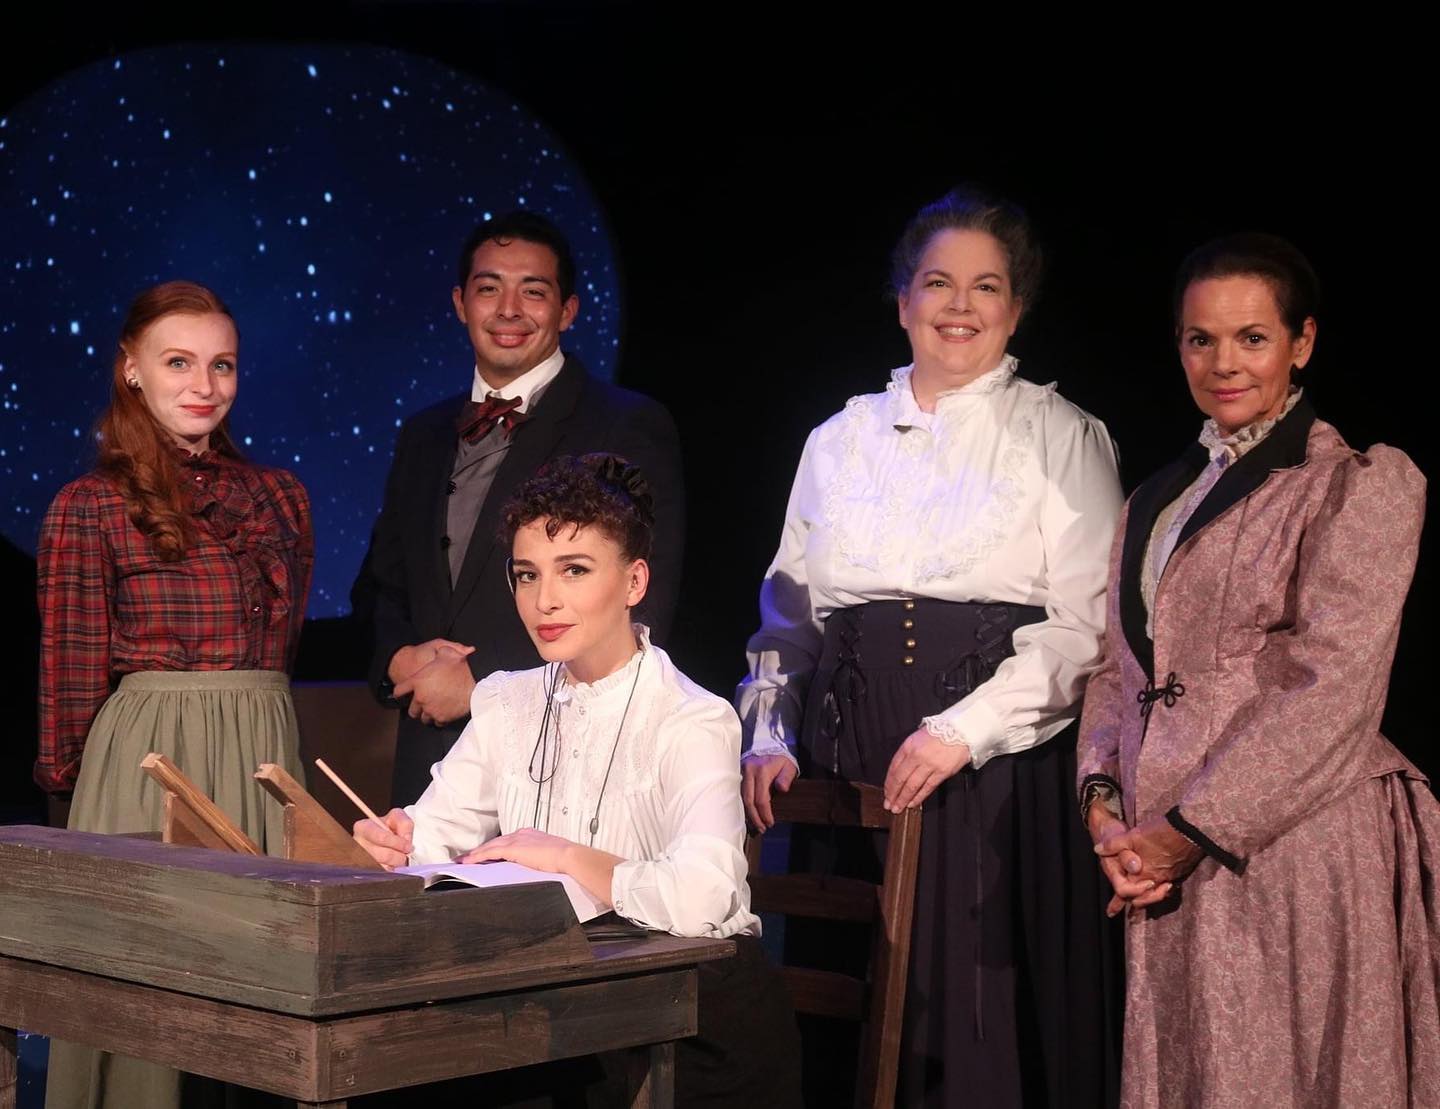 Silent Sky @ The Costa Mesa Playhouse - Review